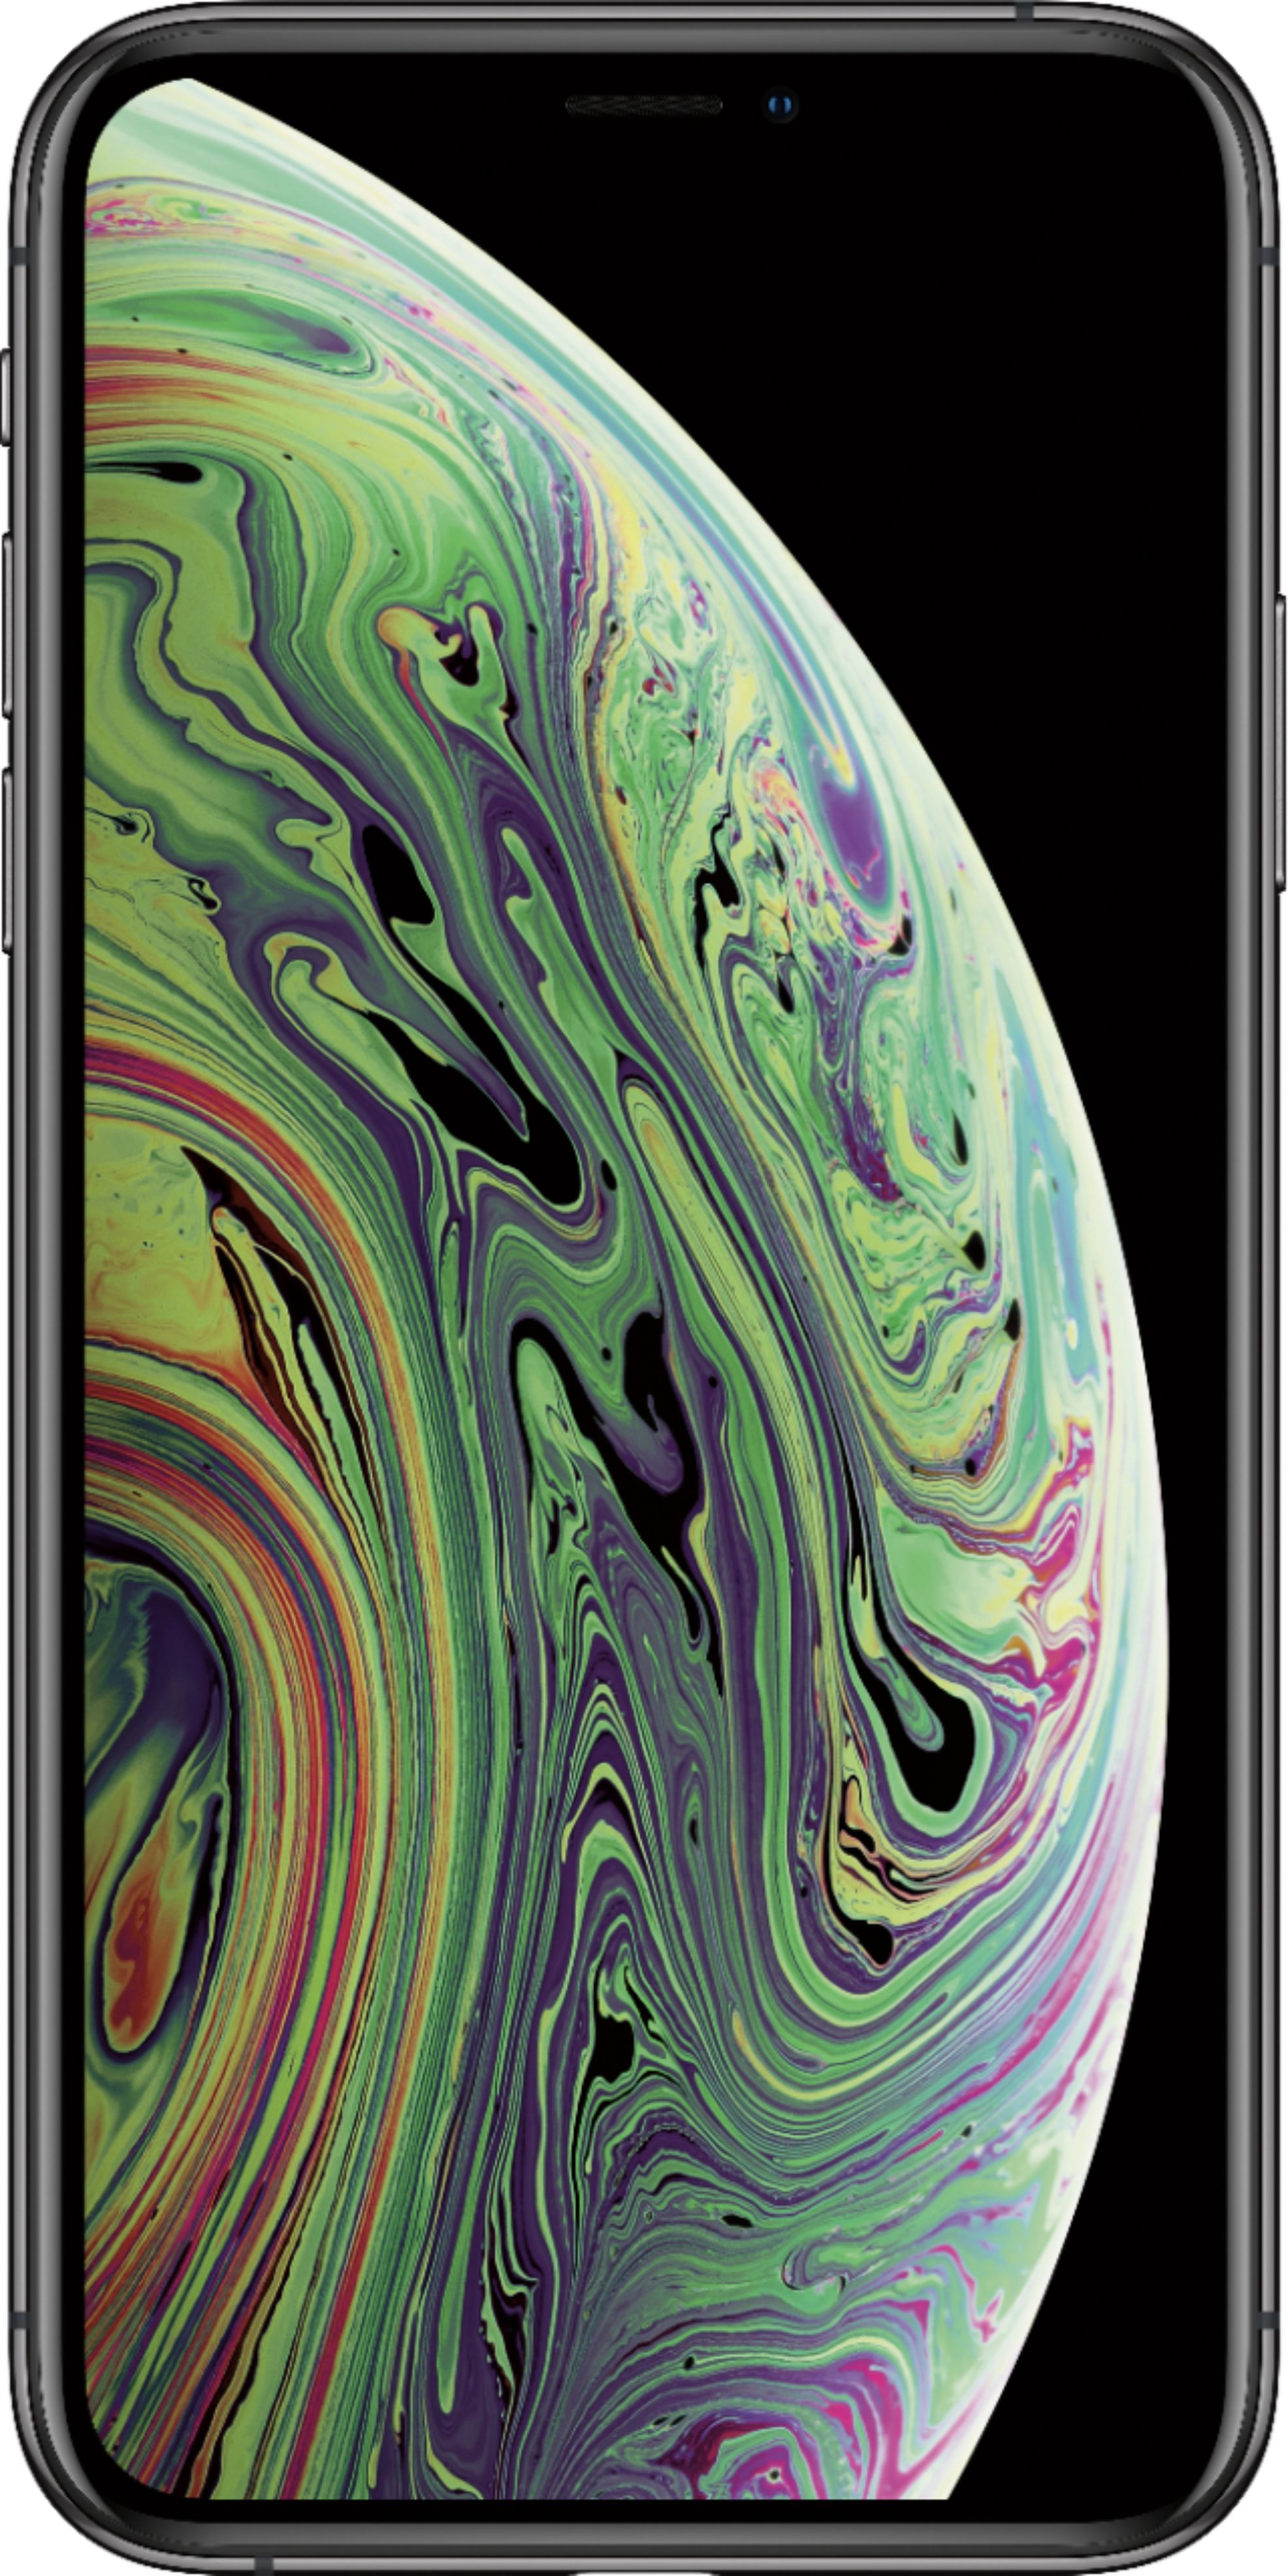 Apple iPhone XS 512GB Space Gray MT9A2LL/A - Best Buy